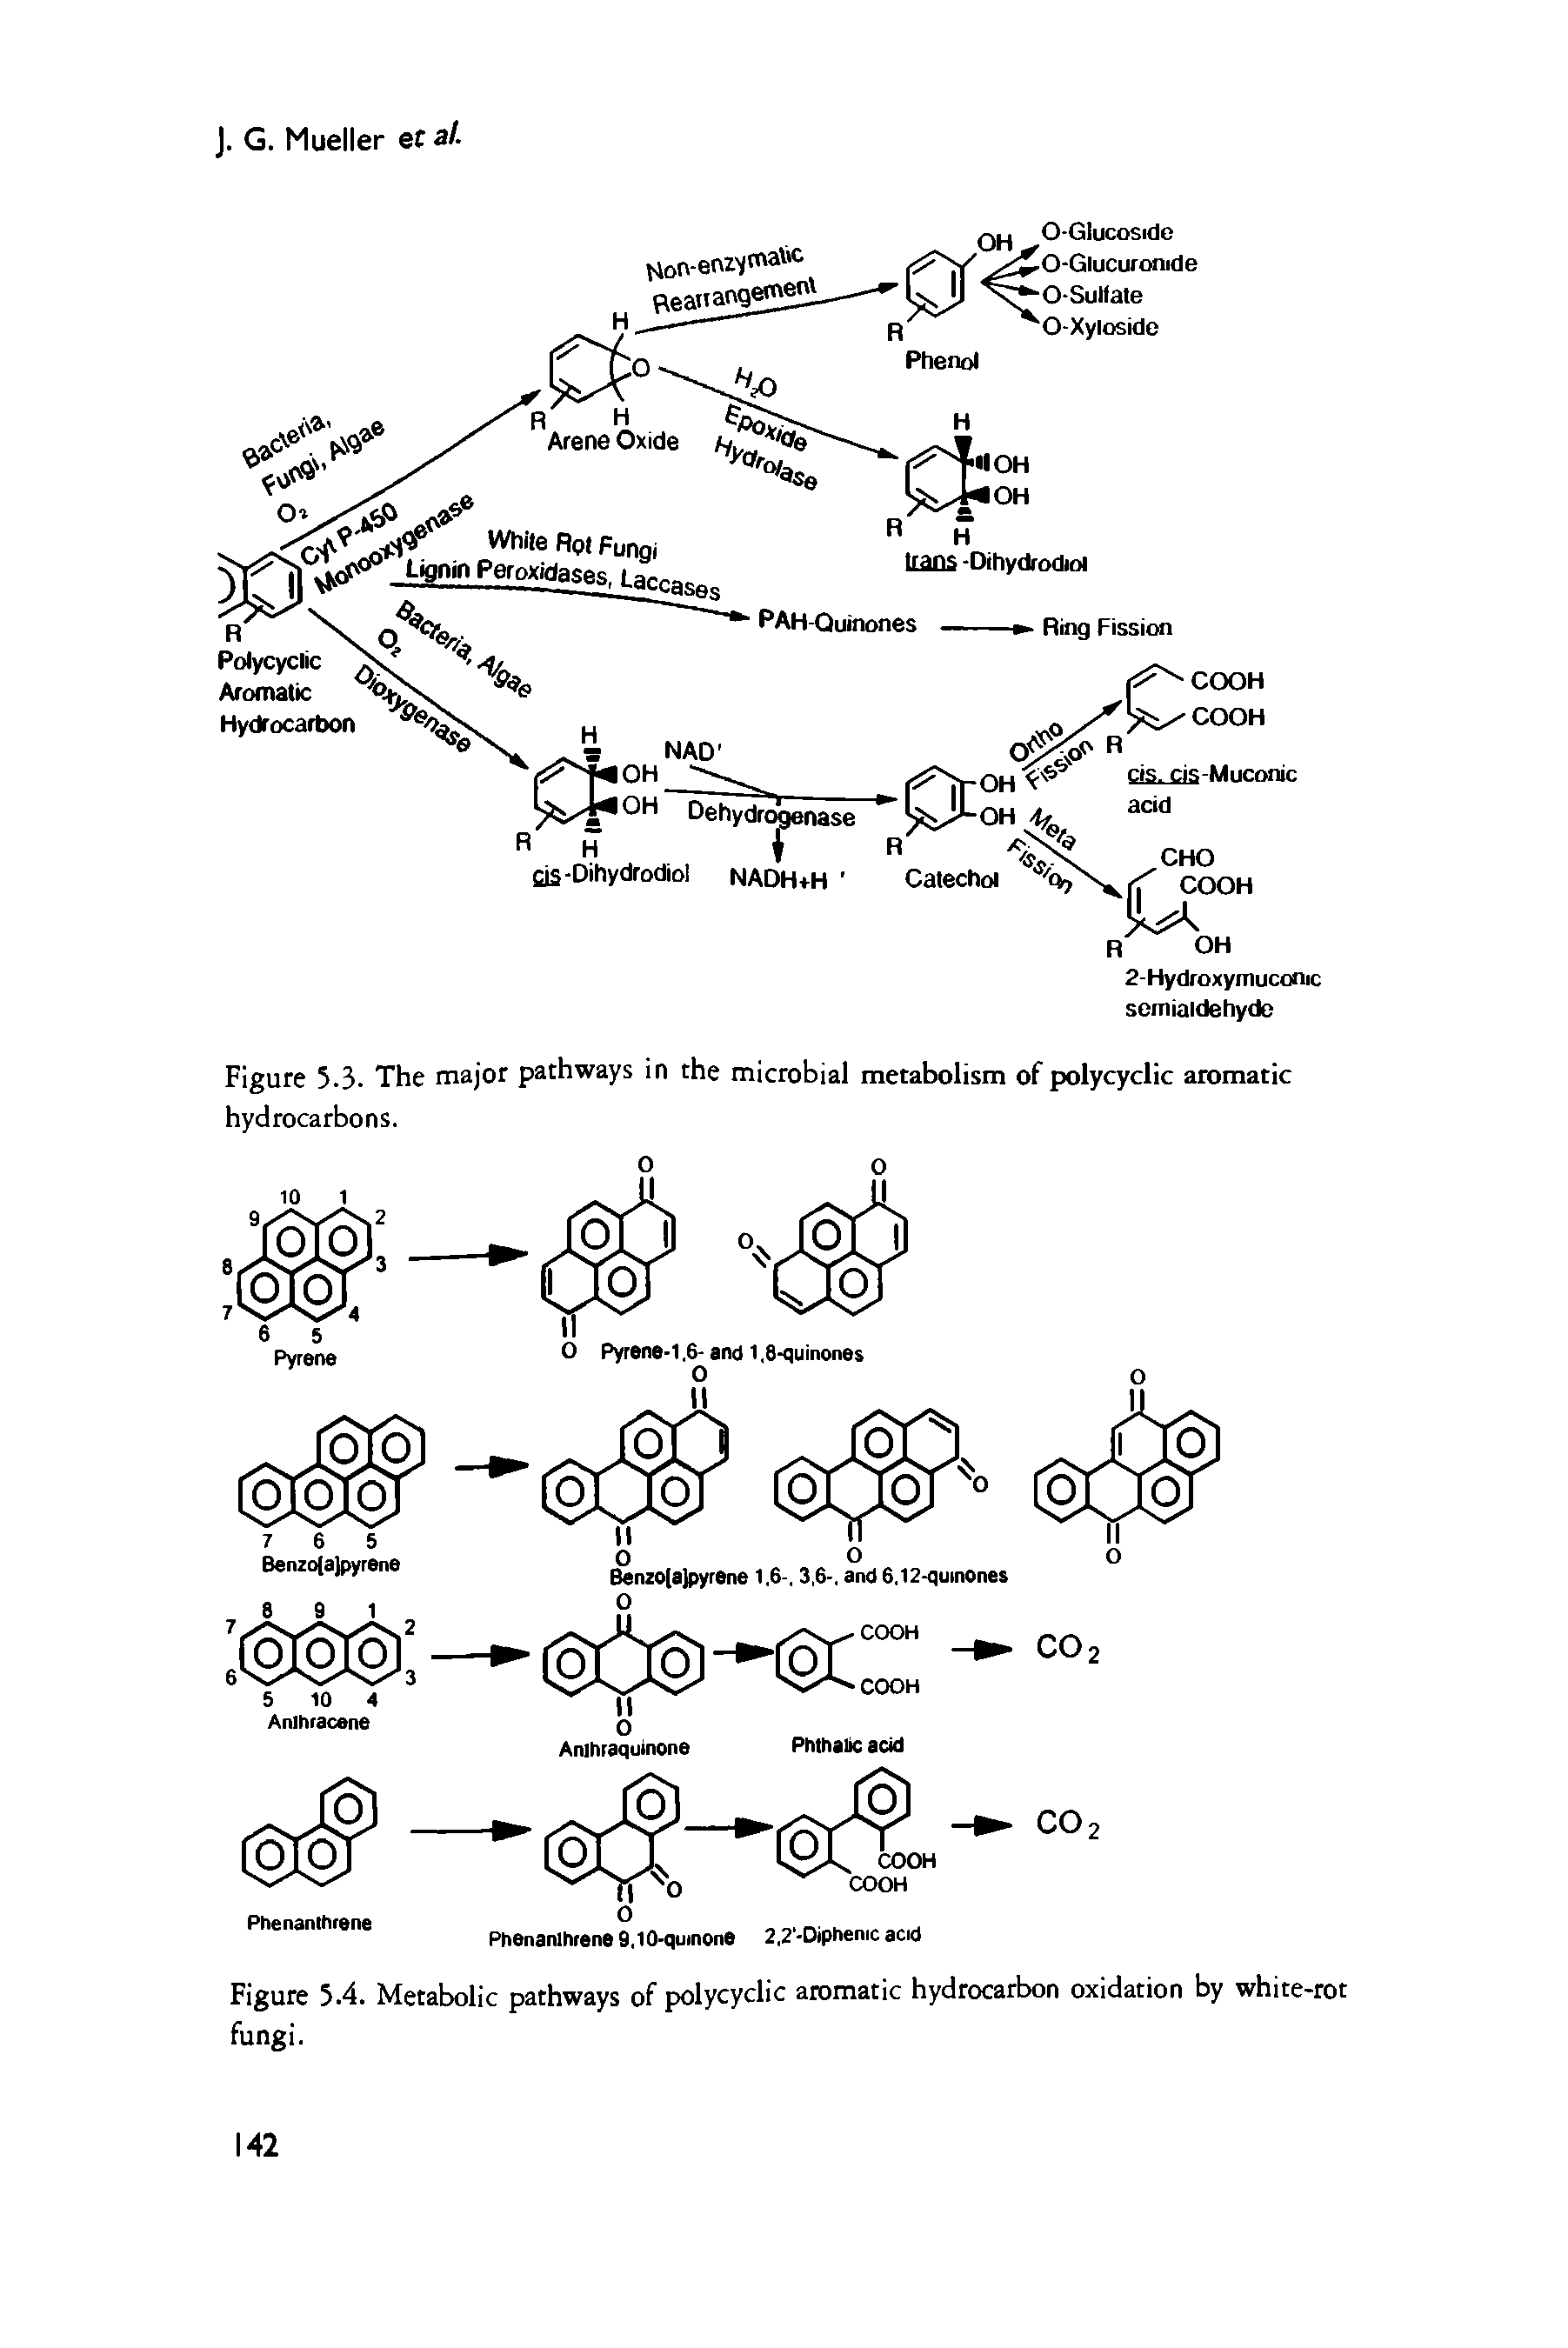 Figure 5.4. Metabolic pathways of polycyclic aromatic hydrocarbon oxidation by white-rot fungi.